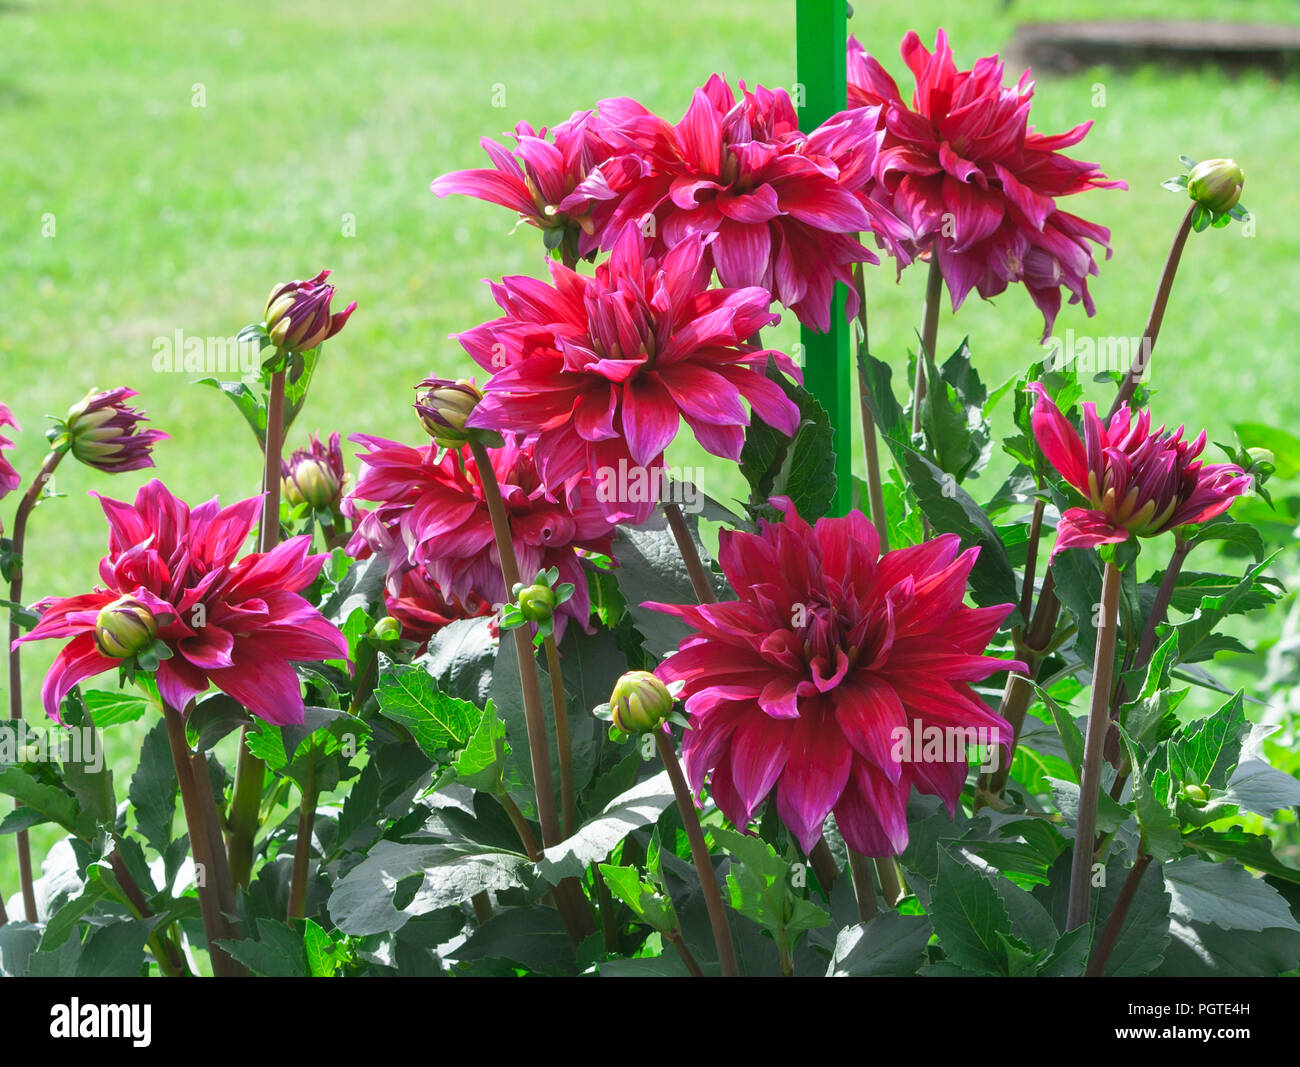 asteraceae dahlia cultorum babylon purple large flowers asters with whitish stripes on the tips of the petals in full bloom against the background Stock Photo